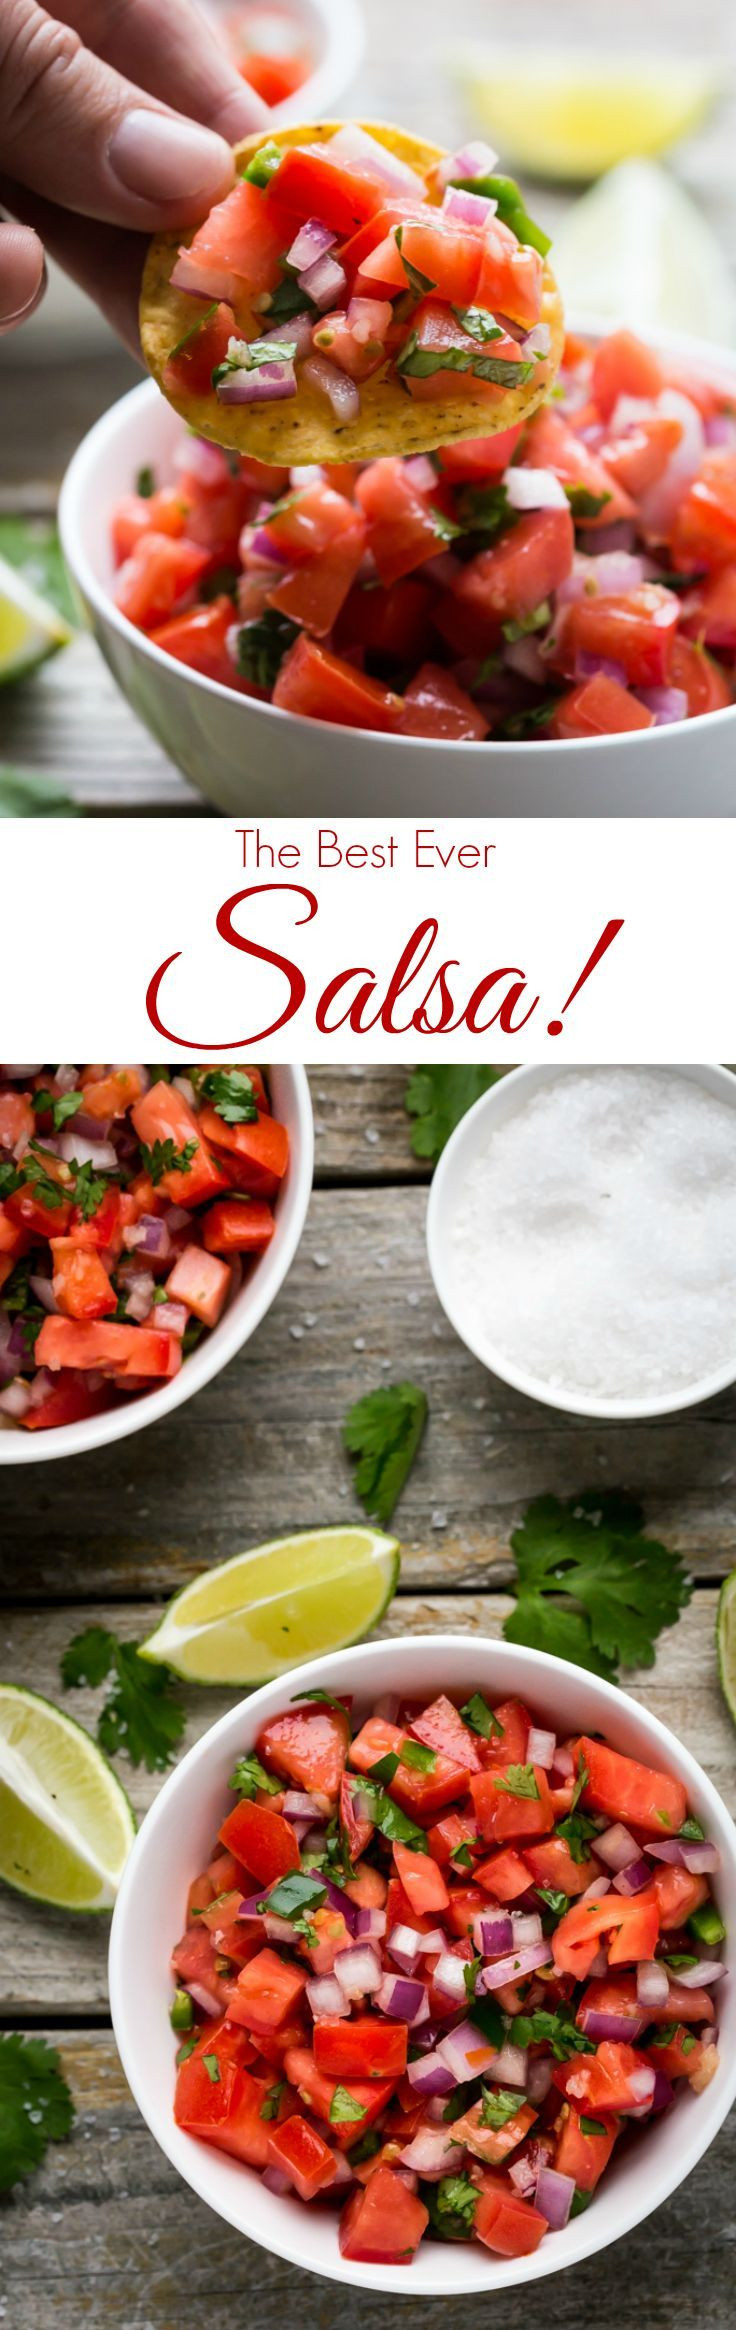 Fresh Salsa Recipe With Cilantro
 The BEST no cook salsa make it in TEN minutes with fresh